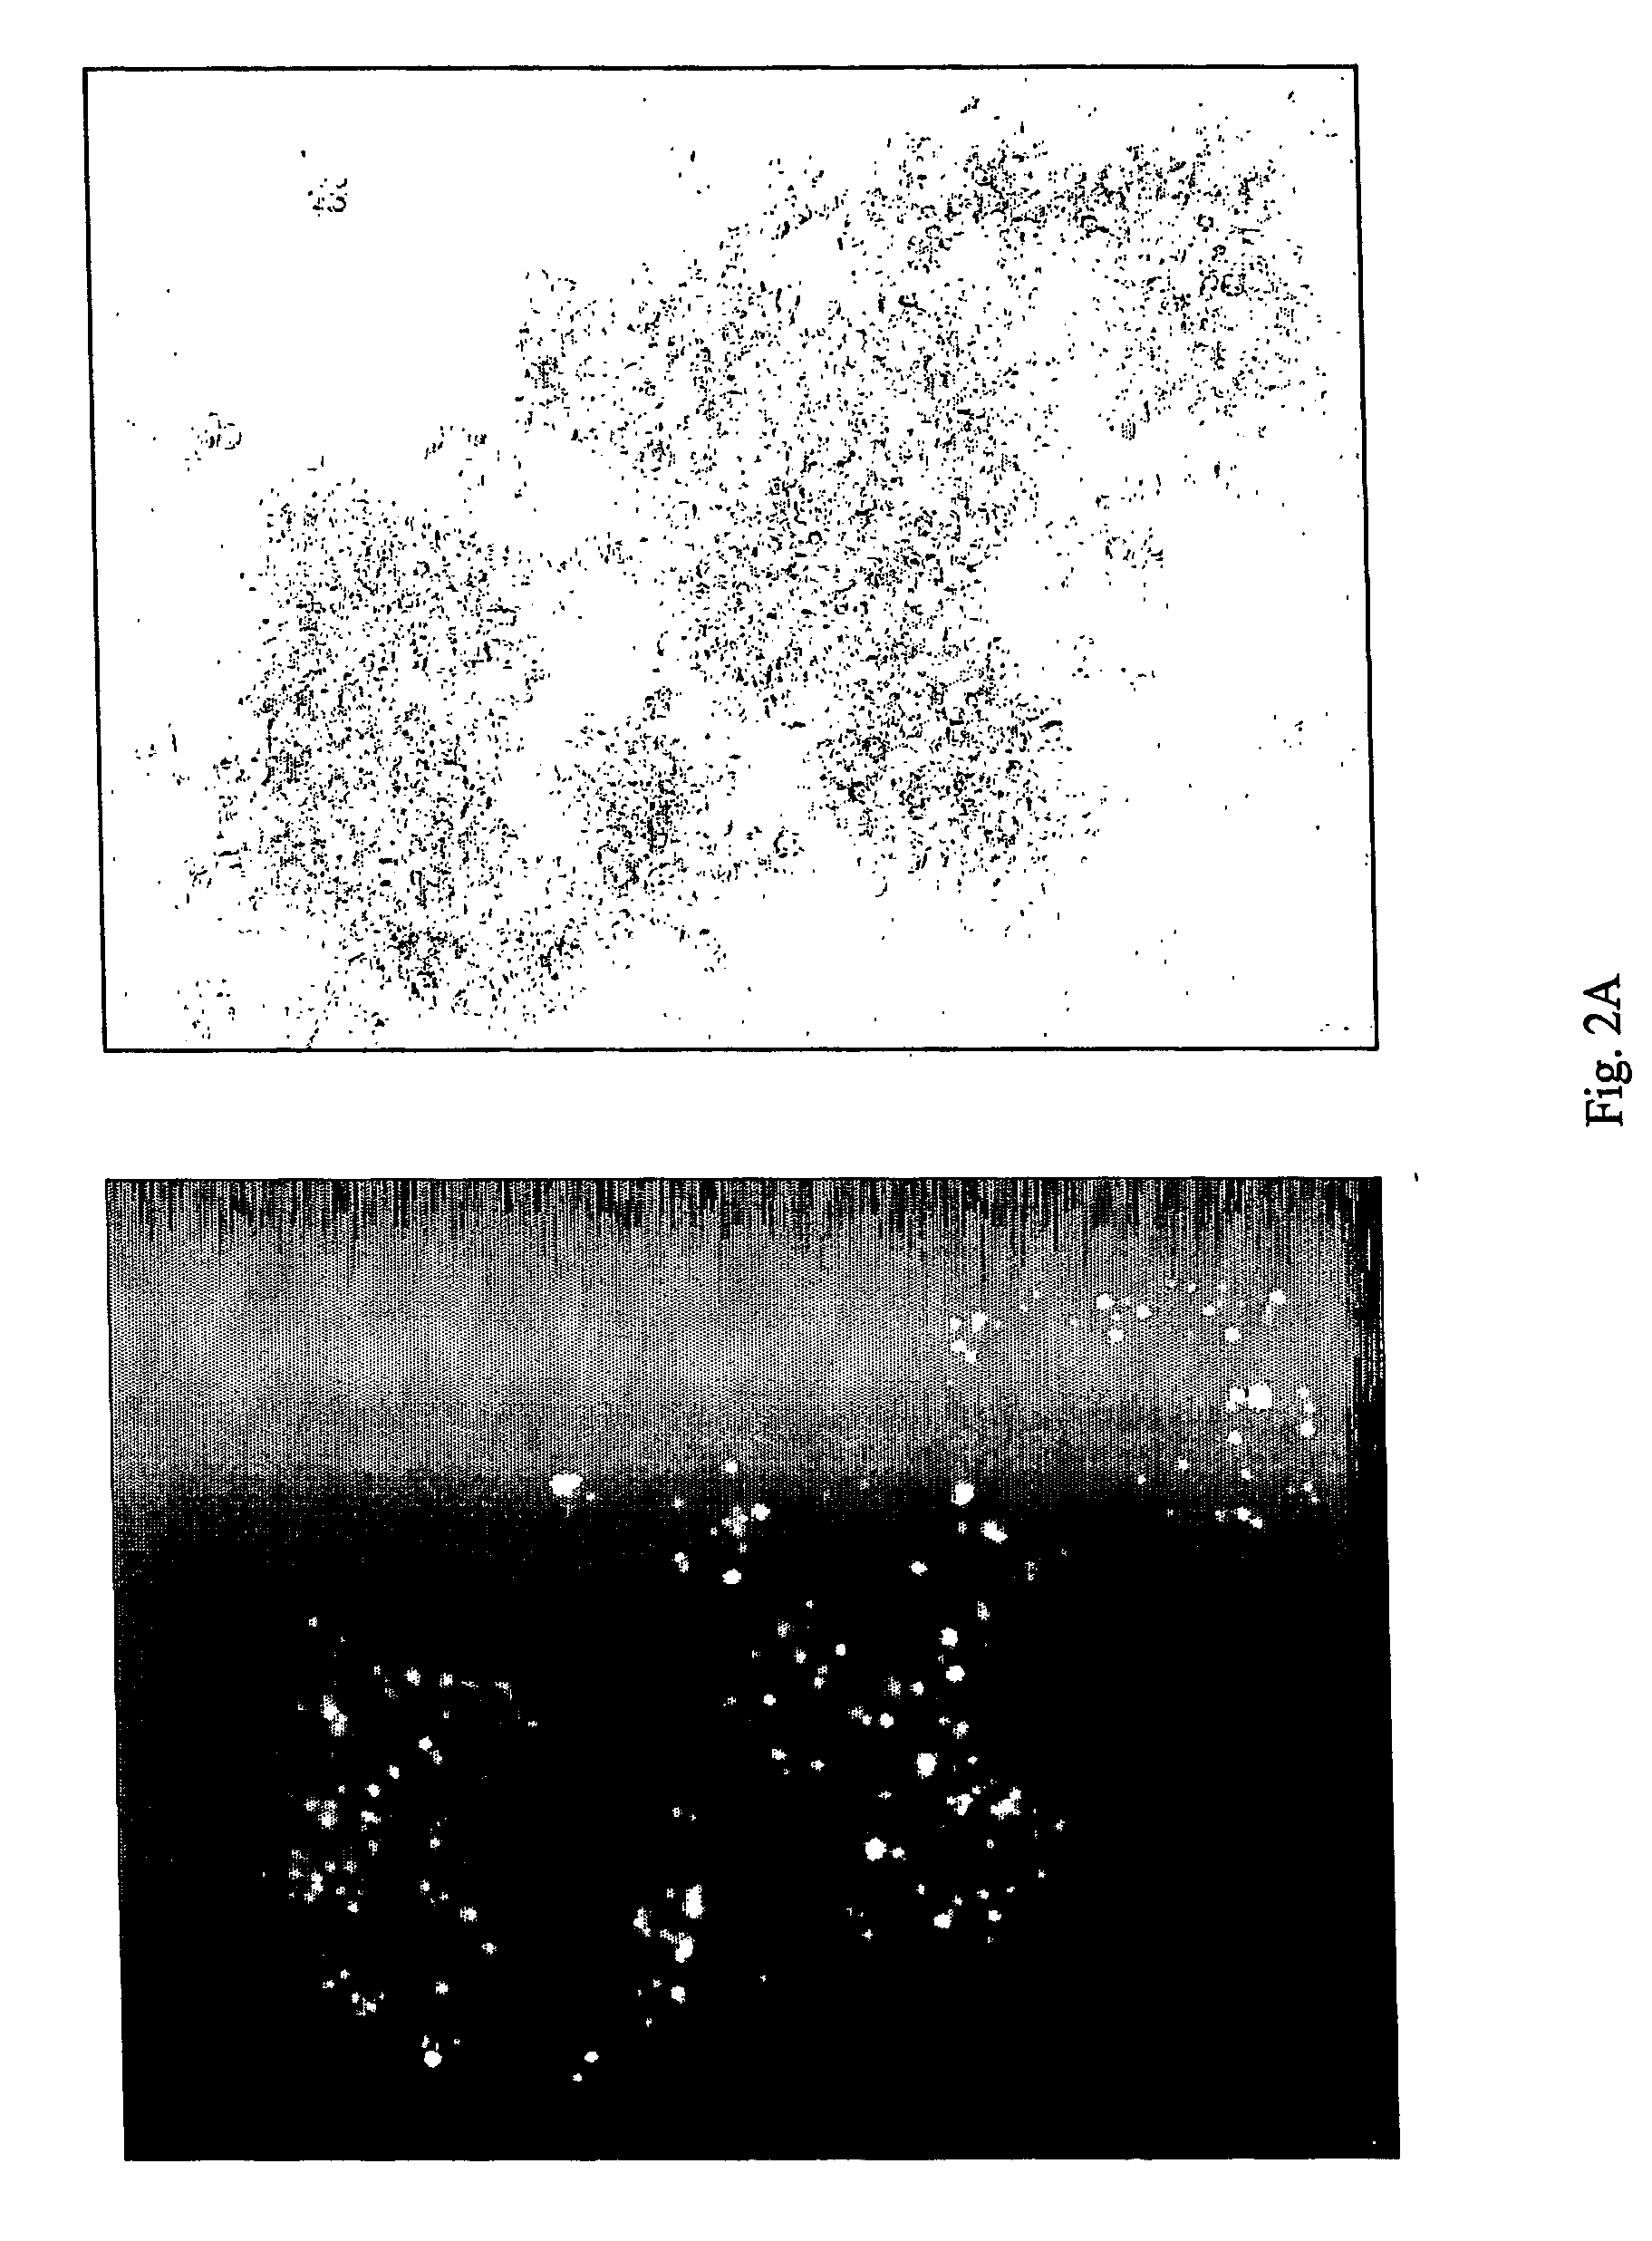 Methods of treatment and diagnosis using modulators of virus-induced cellular gene sequences